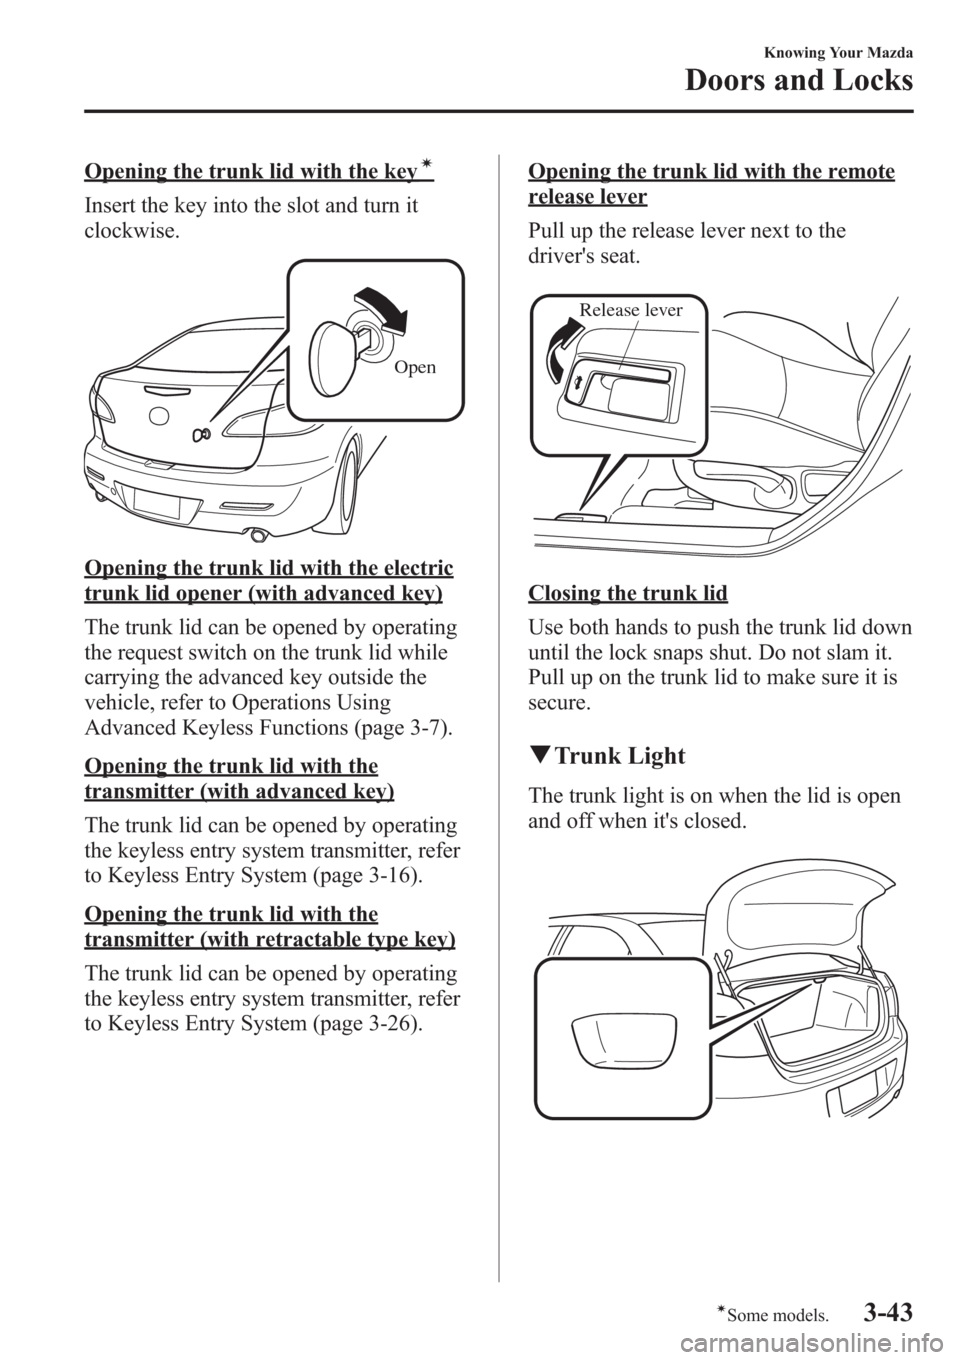 MAZDA MODEL 3 HATCHBACK 2013  Owners Manual (in English) Opening the trunk lid with the keyí
Insert the key into the slot and turn it
clockwise.
Open
Opening the trunk lid with the electric
trunk lid opener (with advanced key)
The trunk lid can be opened b